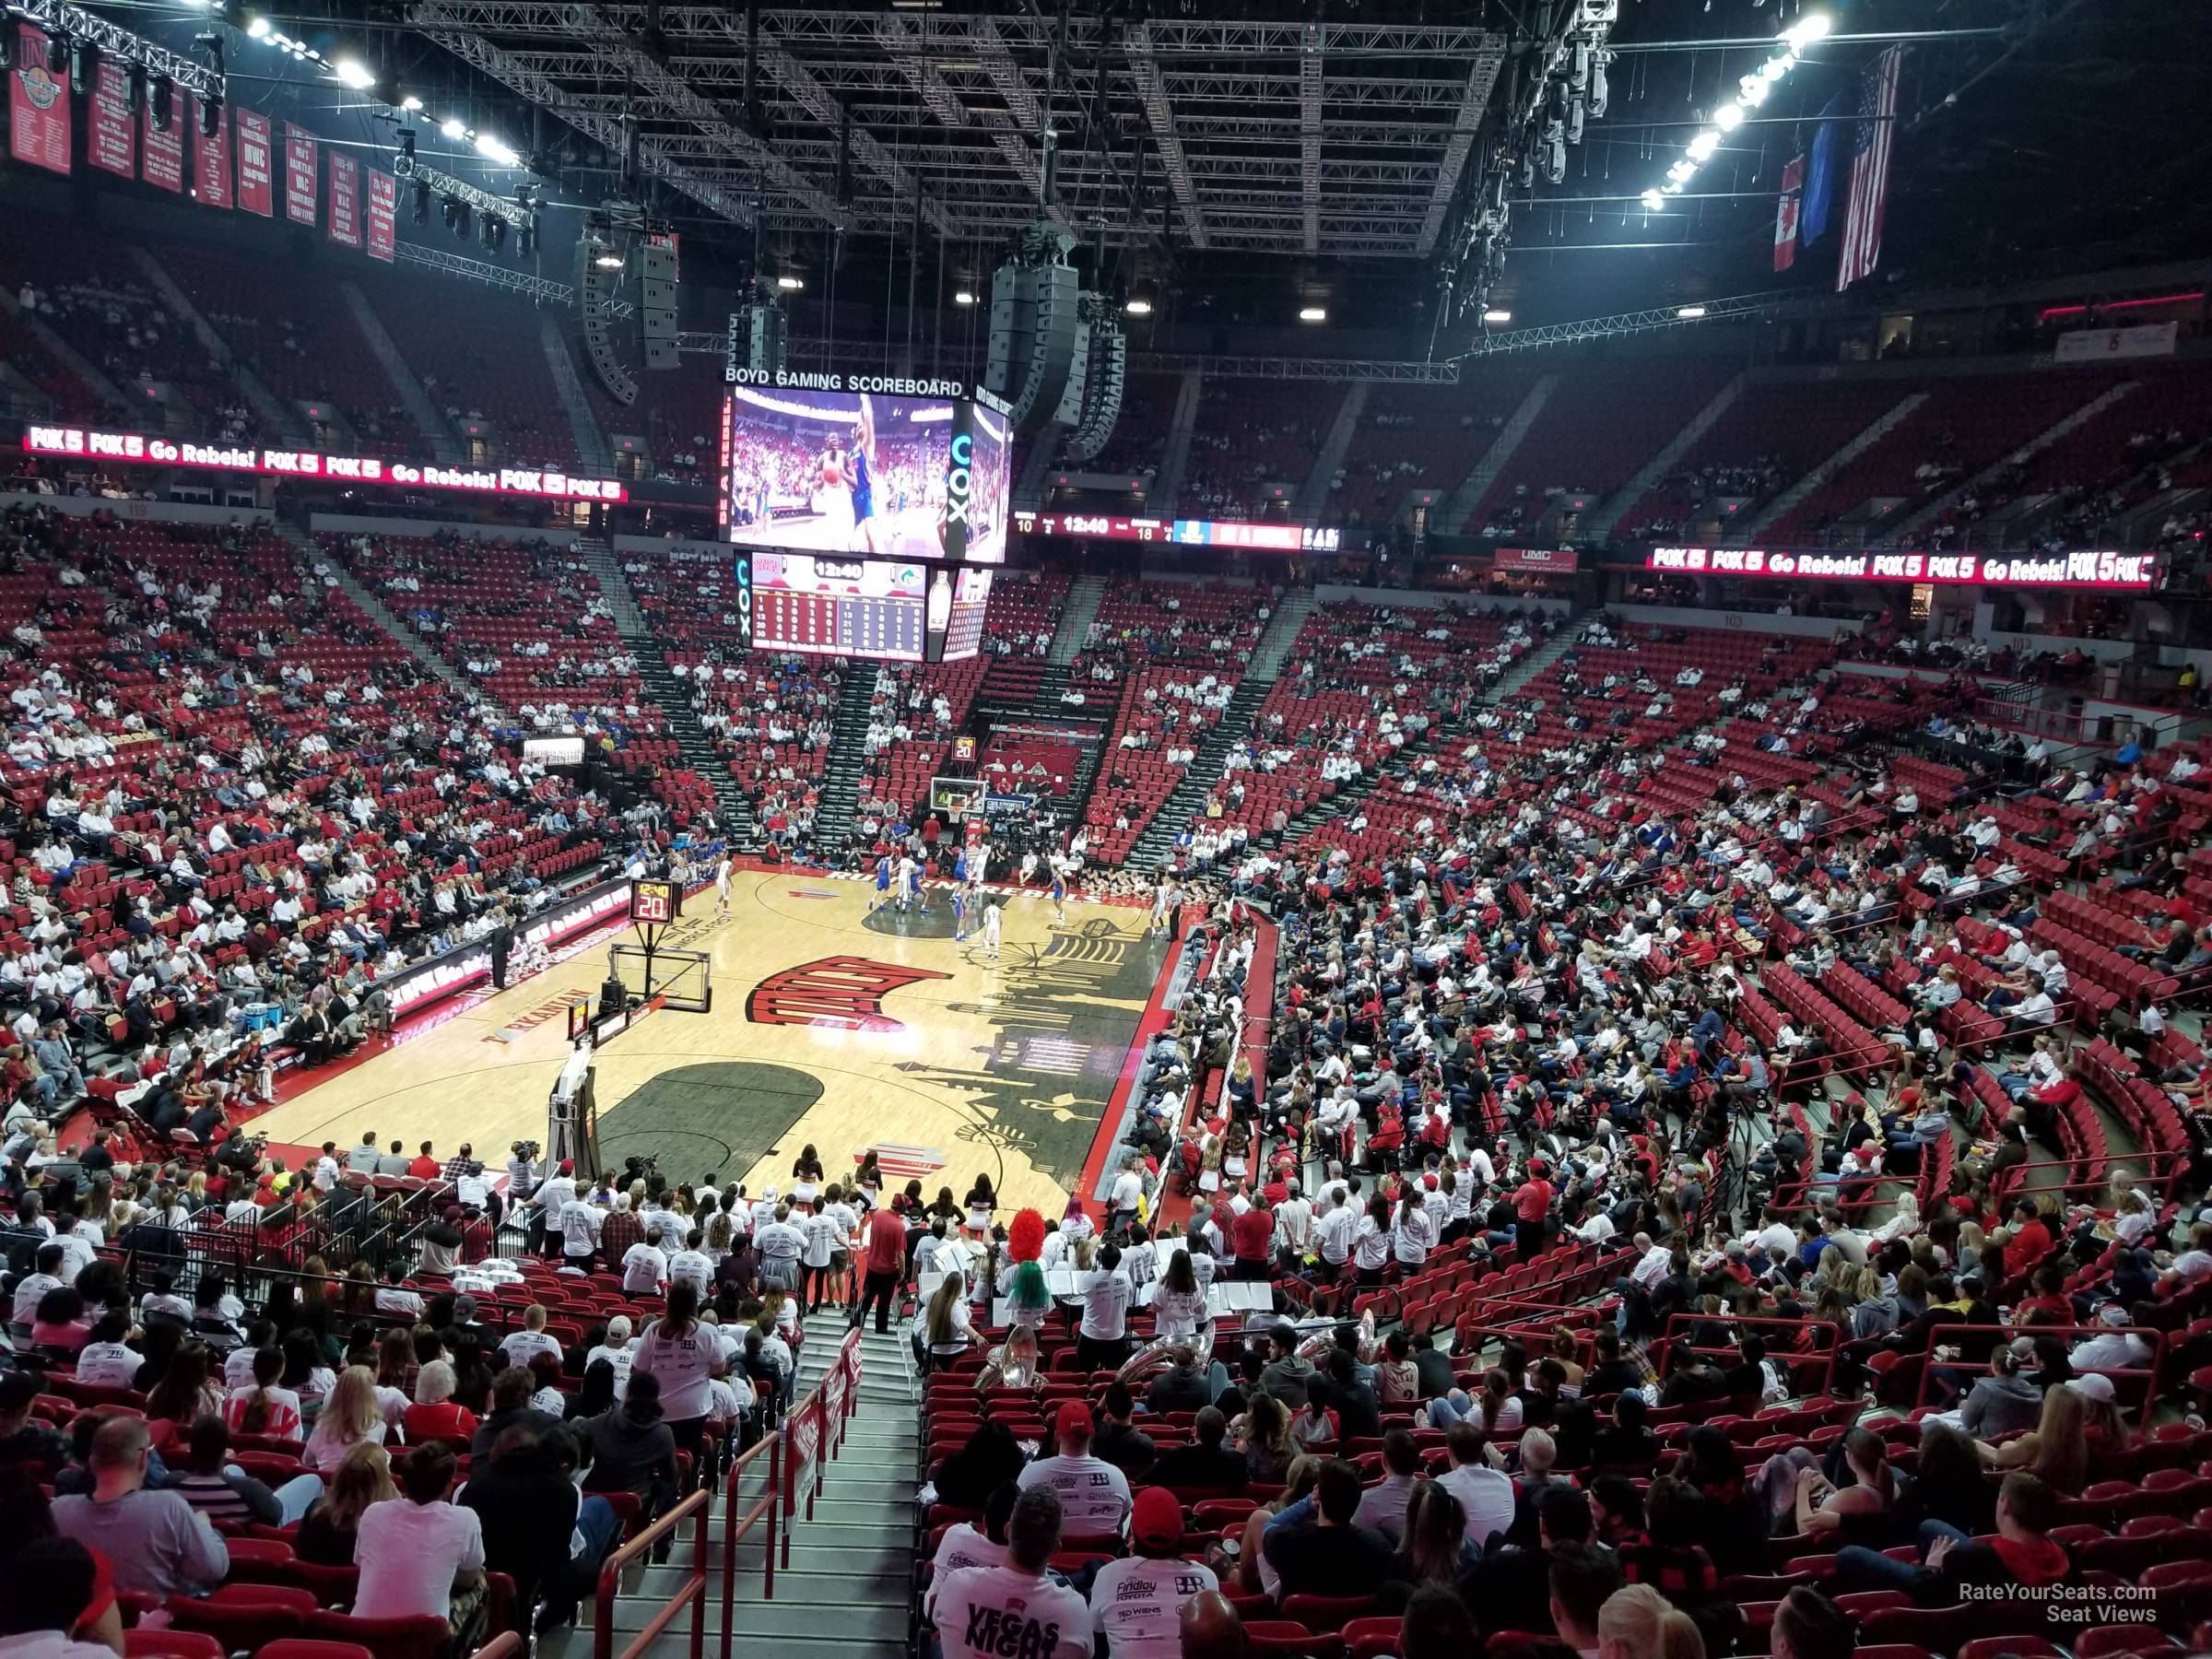 section 110, row v seat view  - thomas and mack center